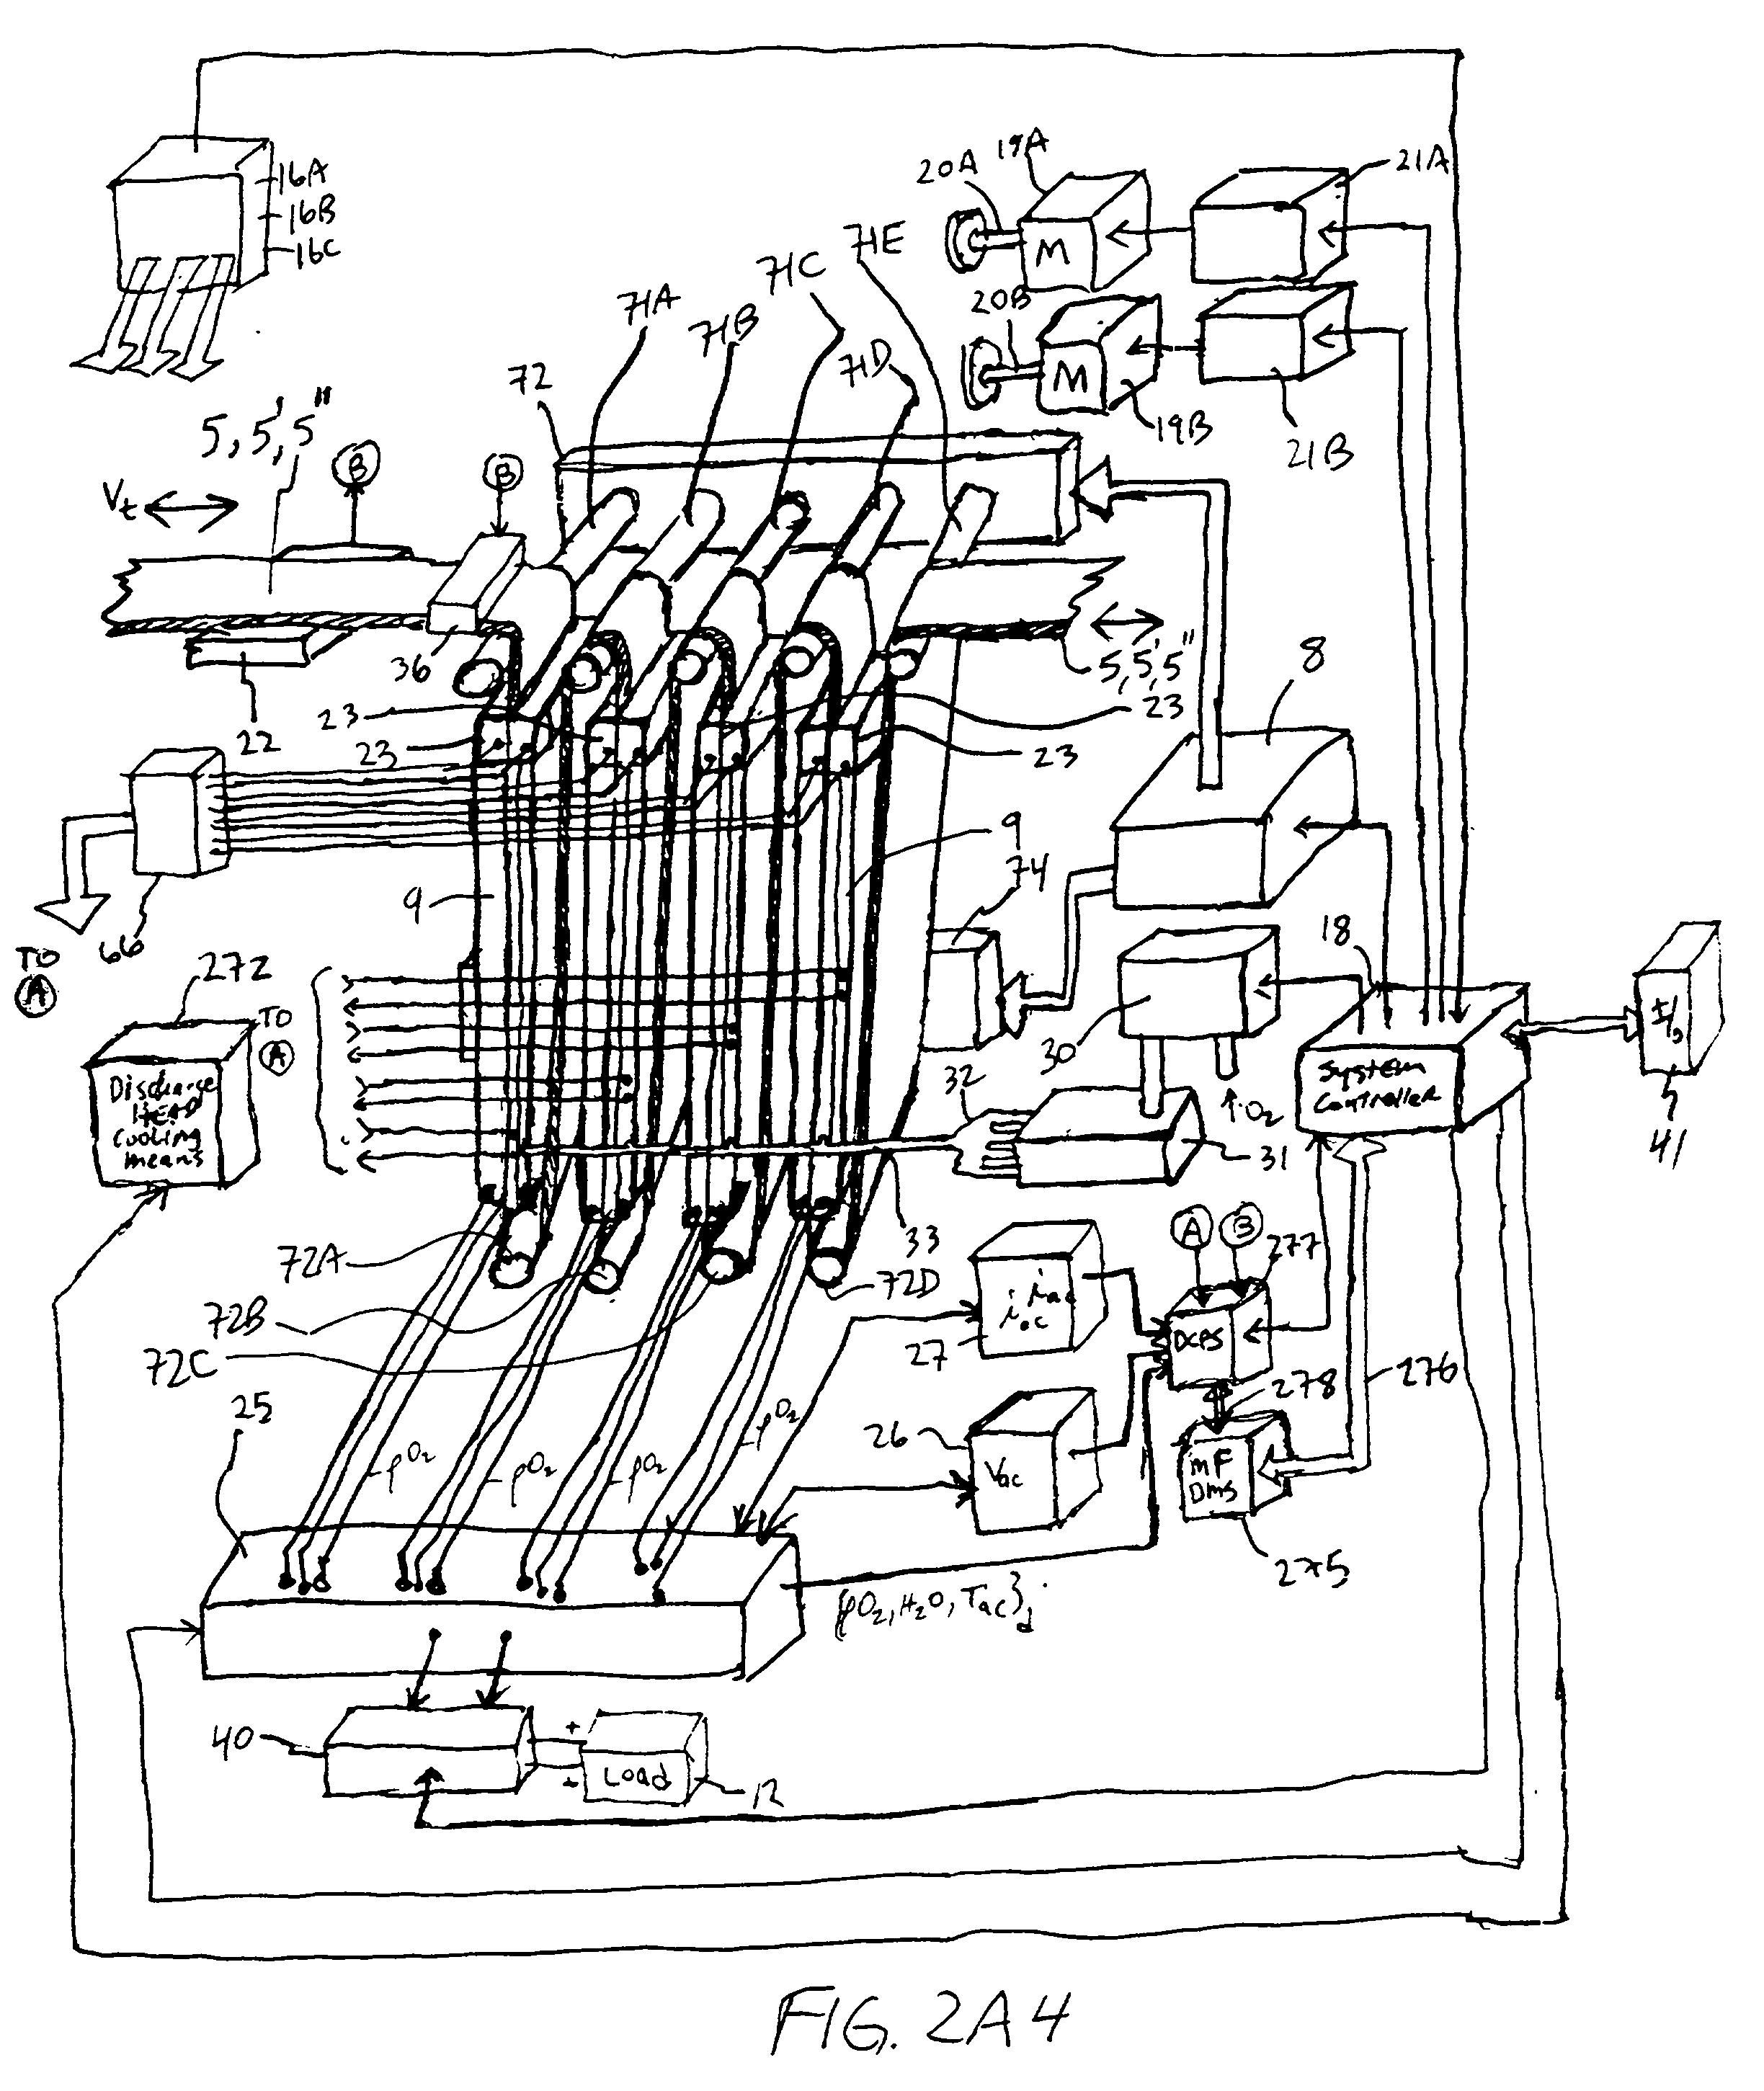 Metal-air fuel cell battery systems having a metal-fuel card storage cassette, insertable within a port in a system housing, containing a supply of substantially planar discrete metal-fuel cards, and fuel card transport mechanisms therein